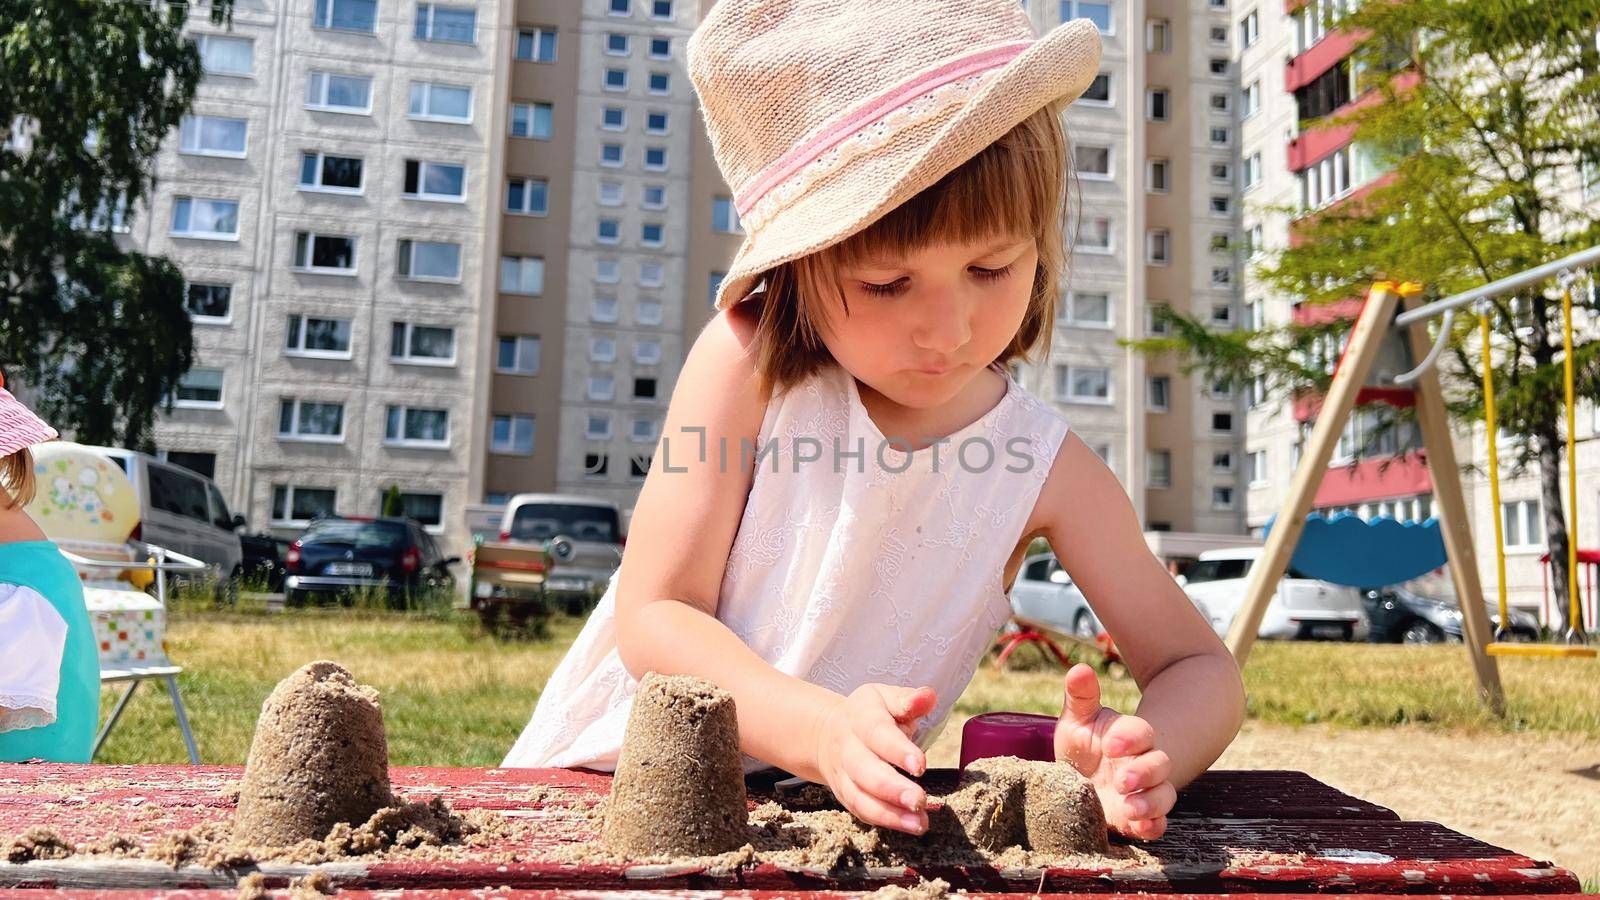 SMALL GIRL IN SUMMER DRESS playing with sand in the backyard of urban block houses in Tallinn, Estonia